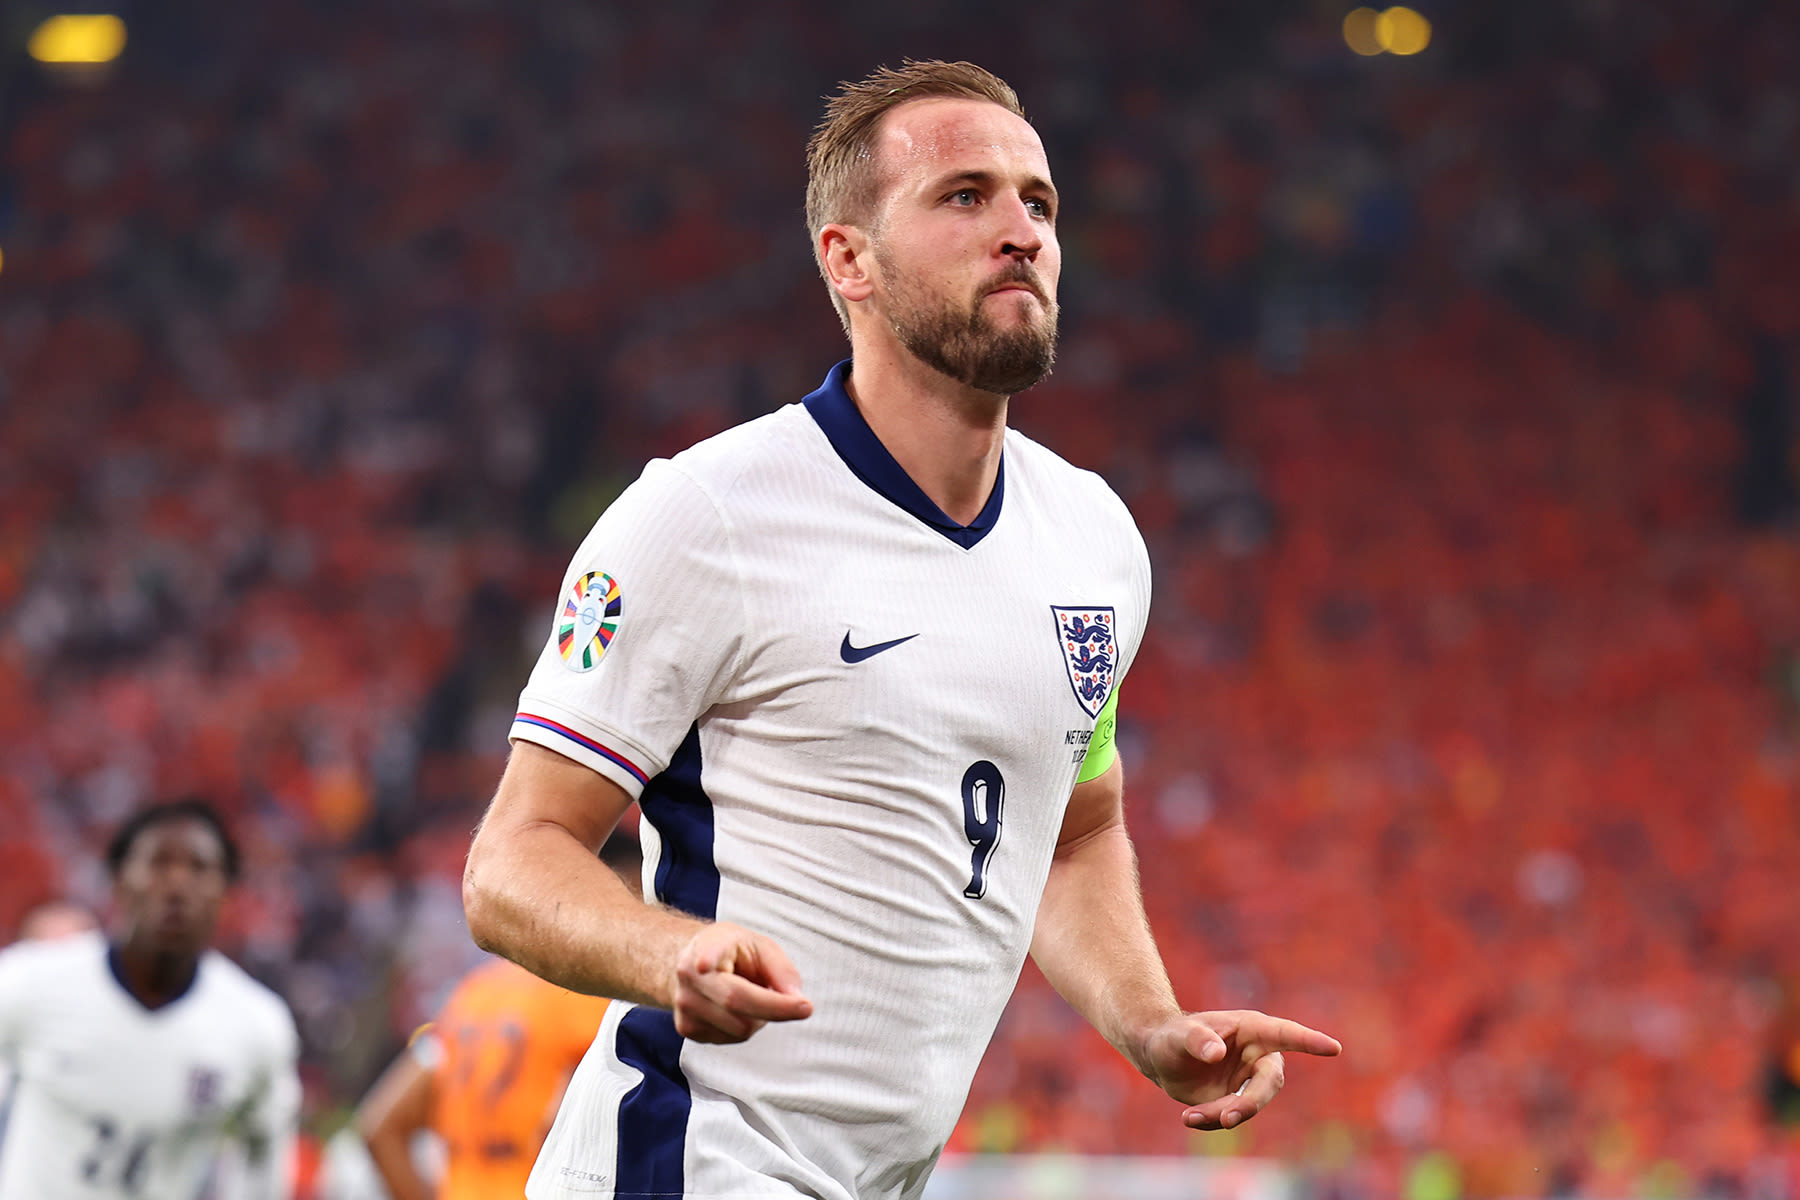 England vs. Spain Livestream: How to Watch the Euro Championship Final Online